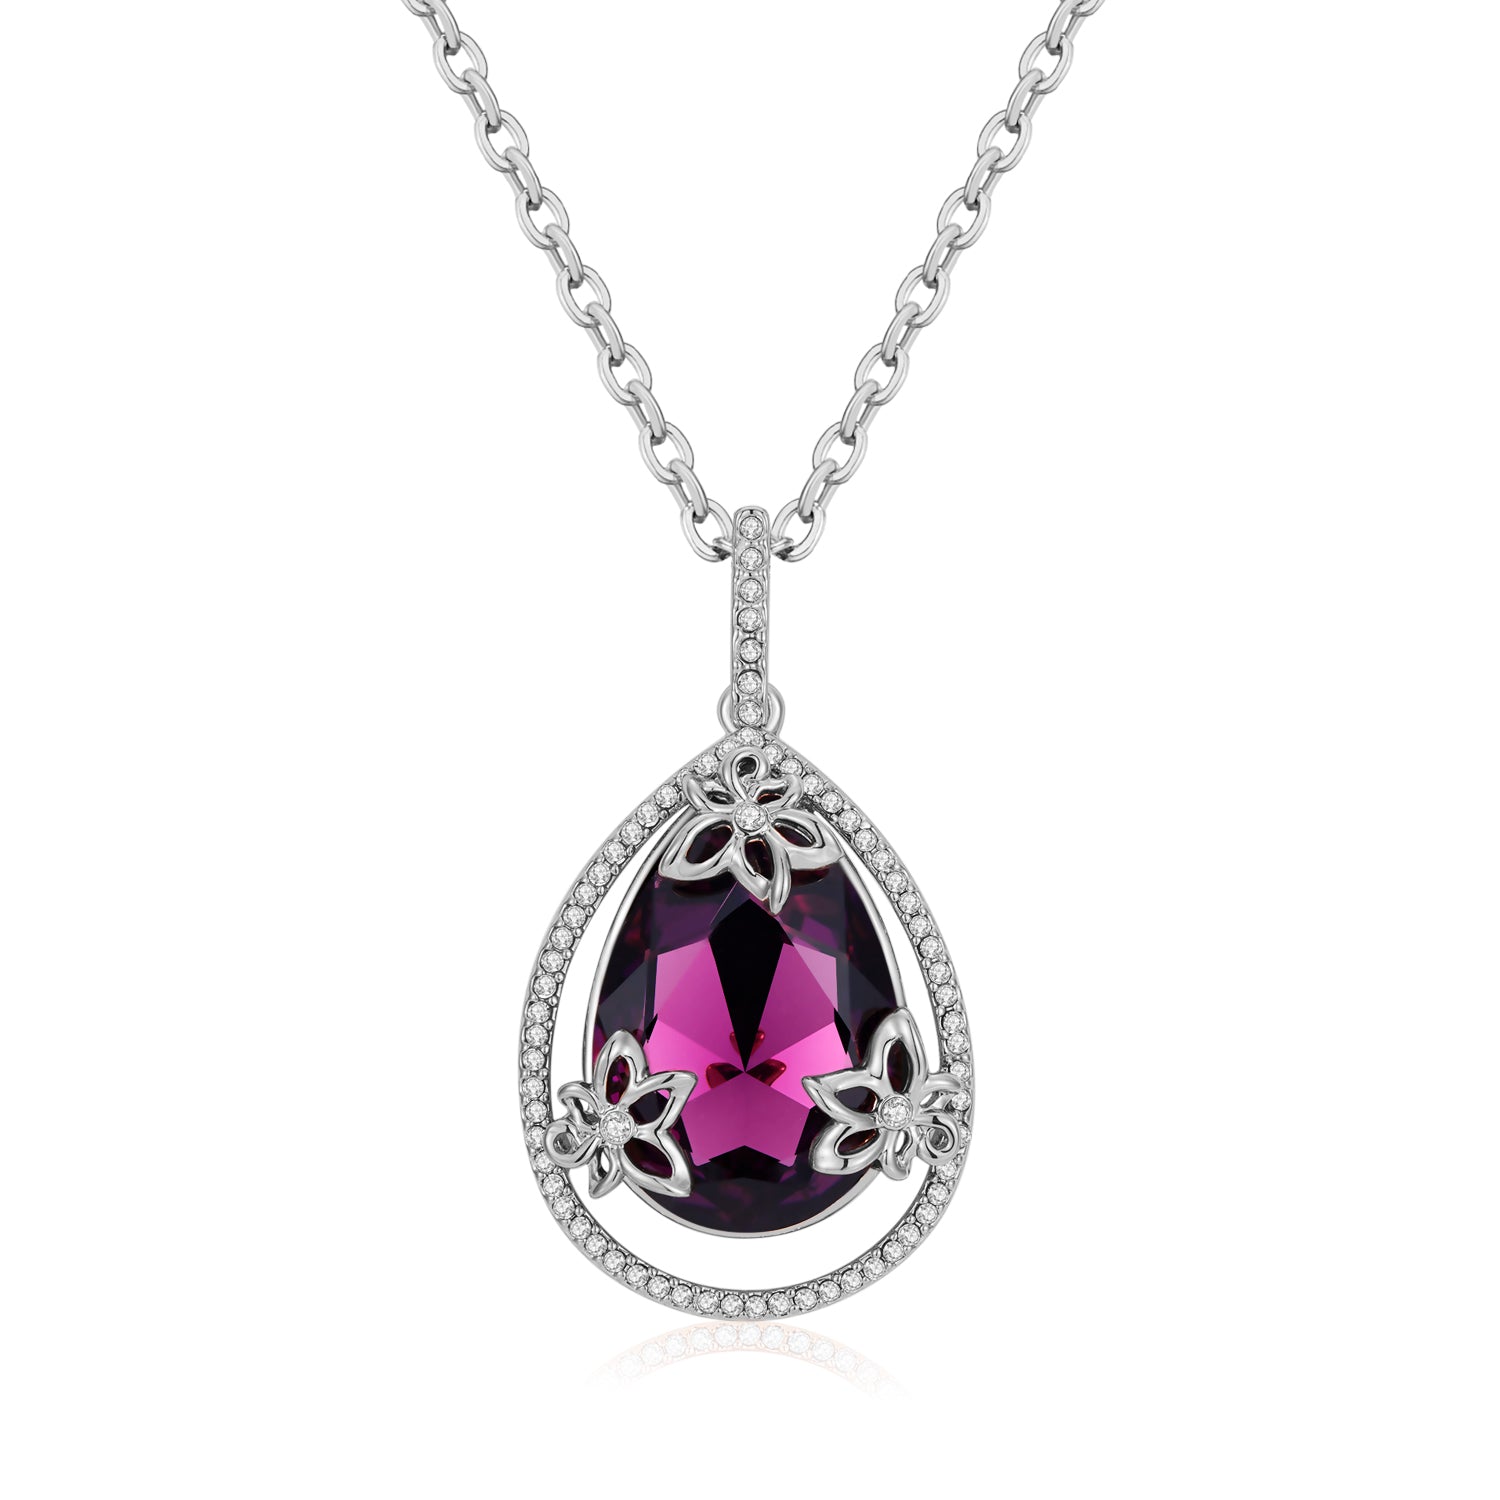 Lucky VICACCI Mermaid Tears Pendant Necklace with Swarovski Crystals